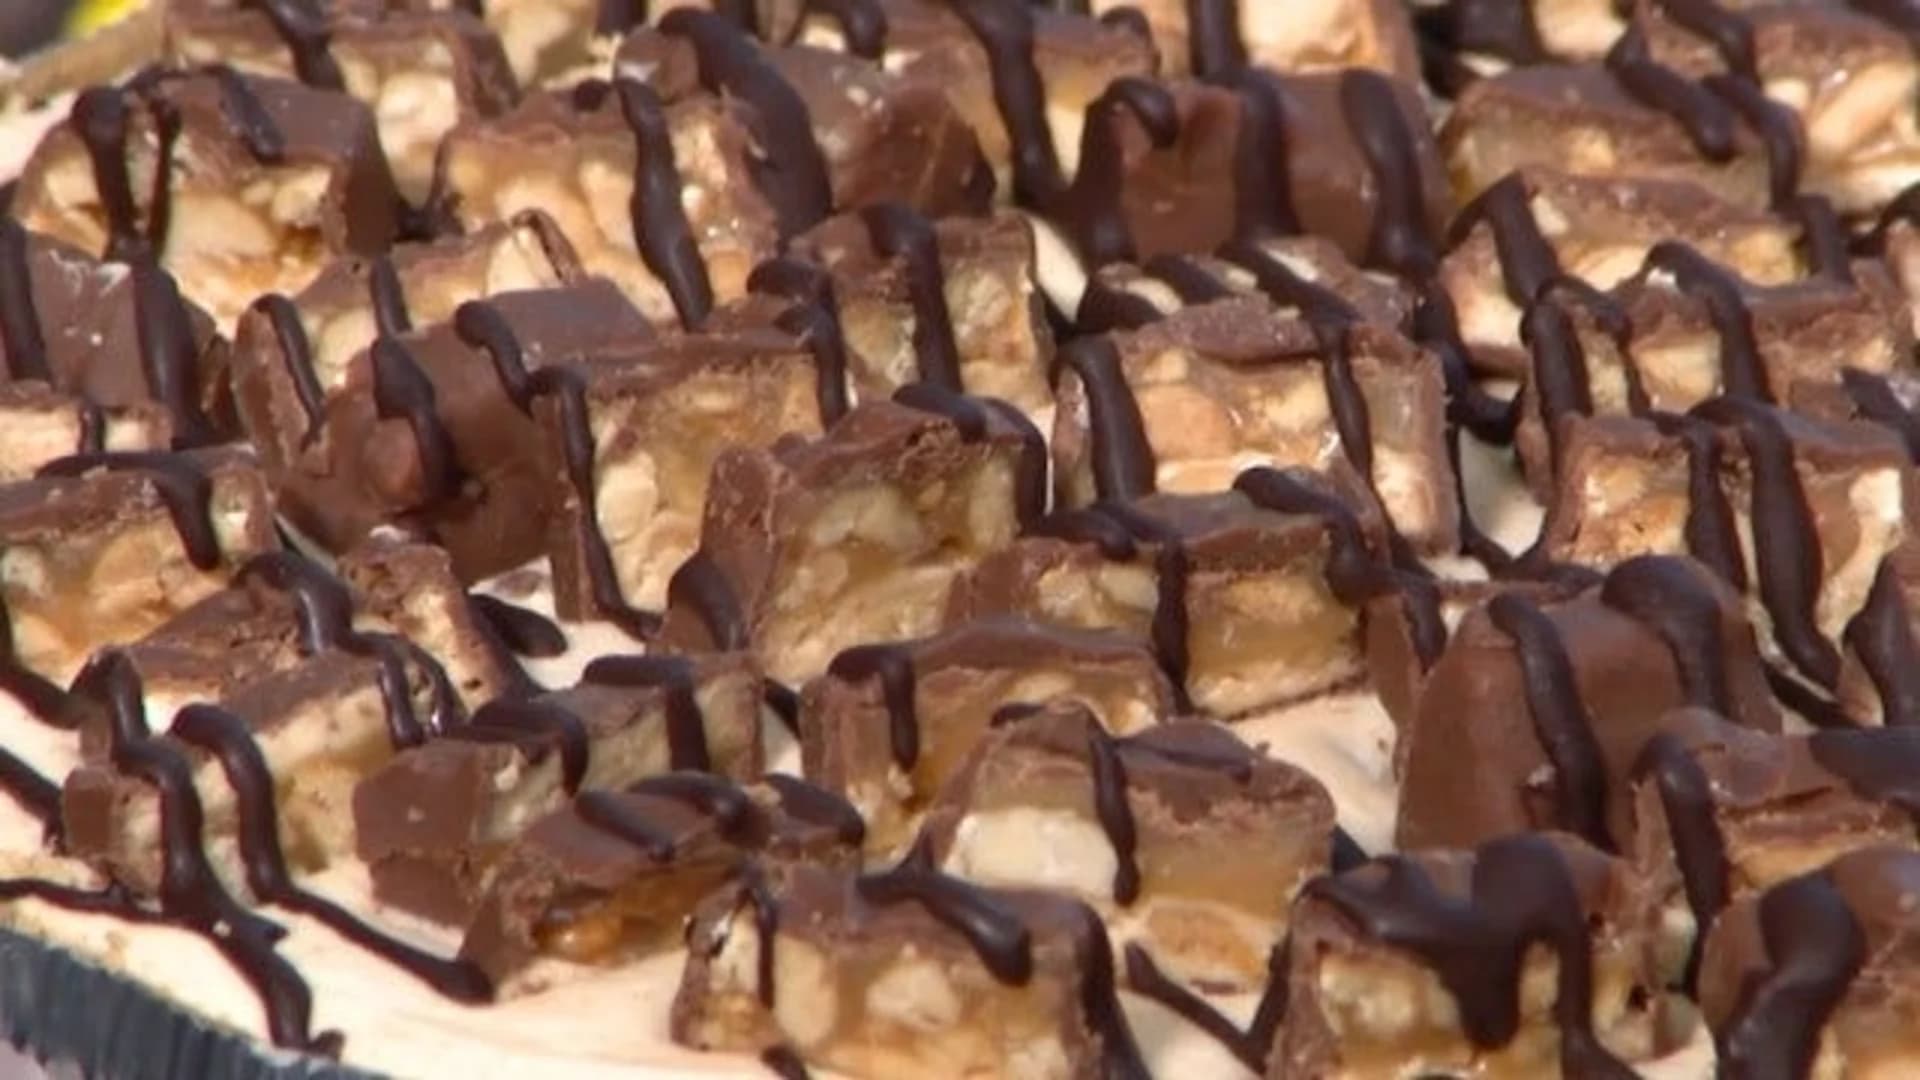 Tasty Tuesday: No-bake pies with leftover Halloween candy